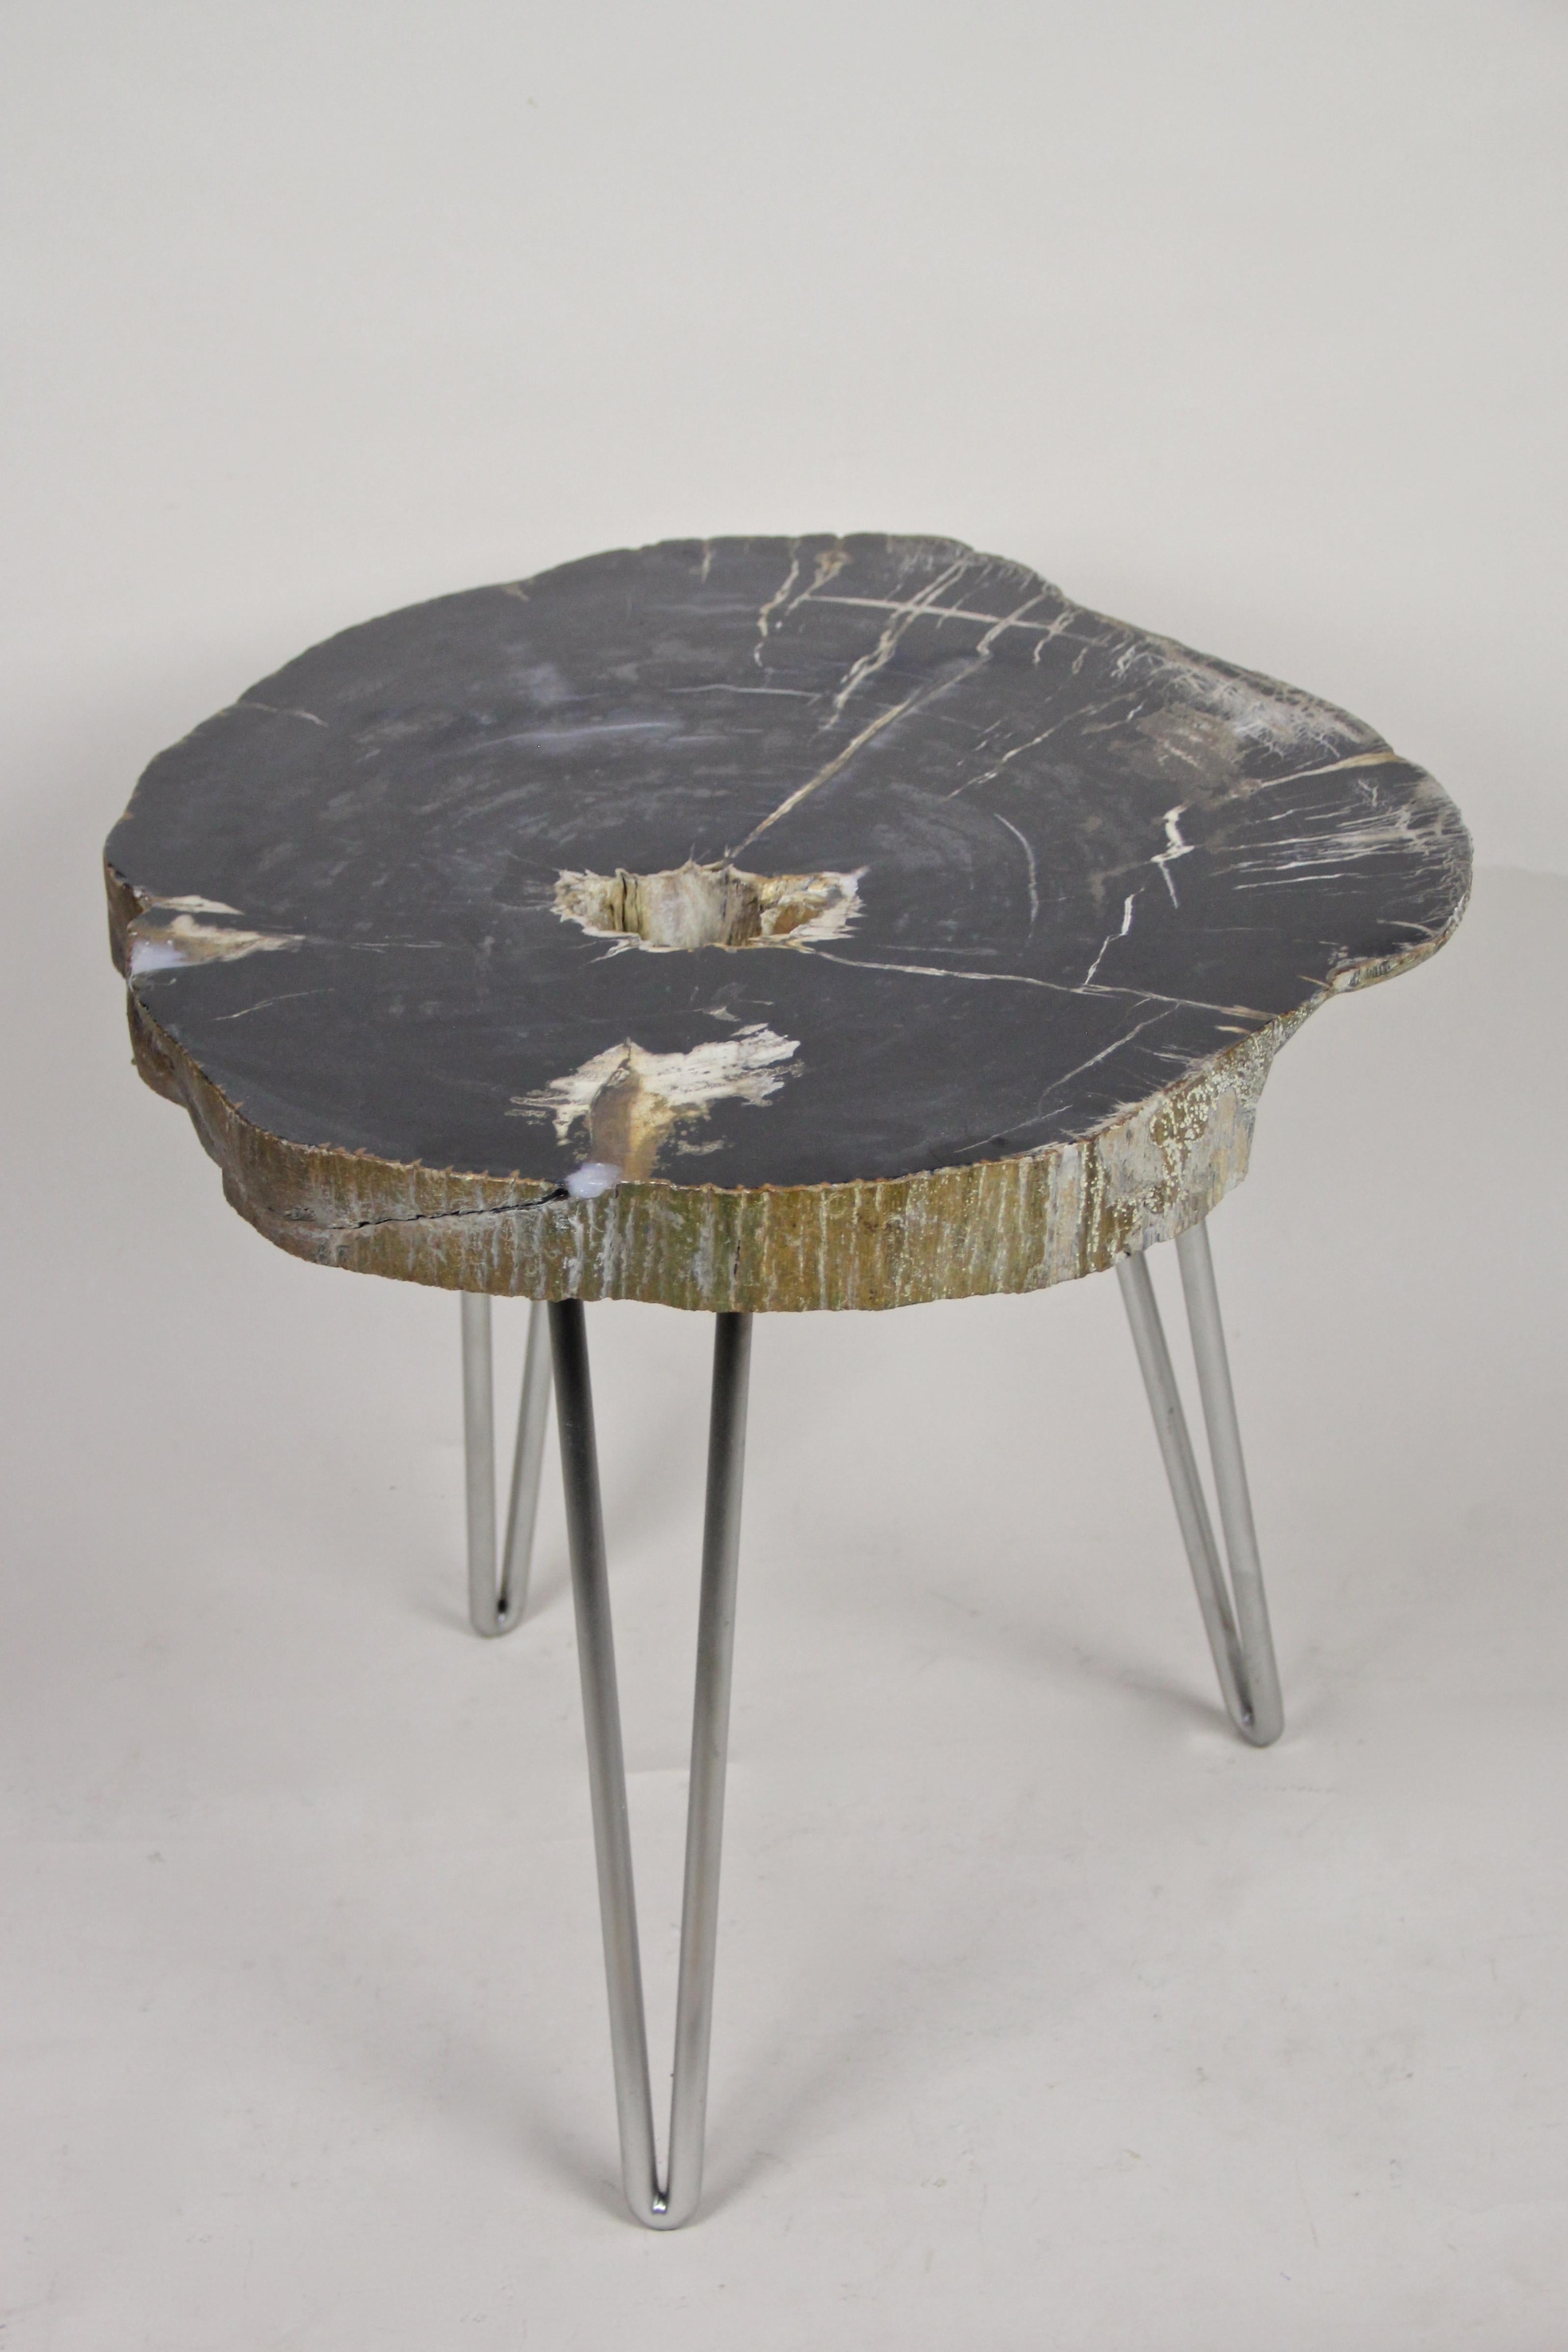 Polished Petrified Wood Coffee Table on Stainless Steel Feet, Organic Modern For Sale